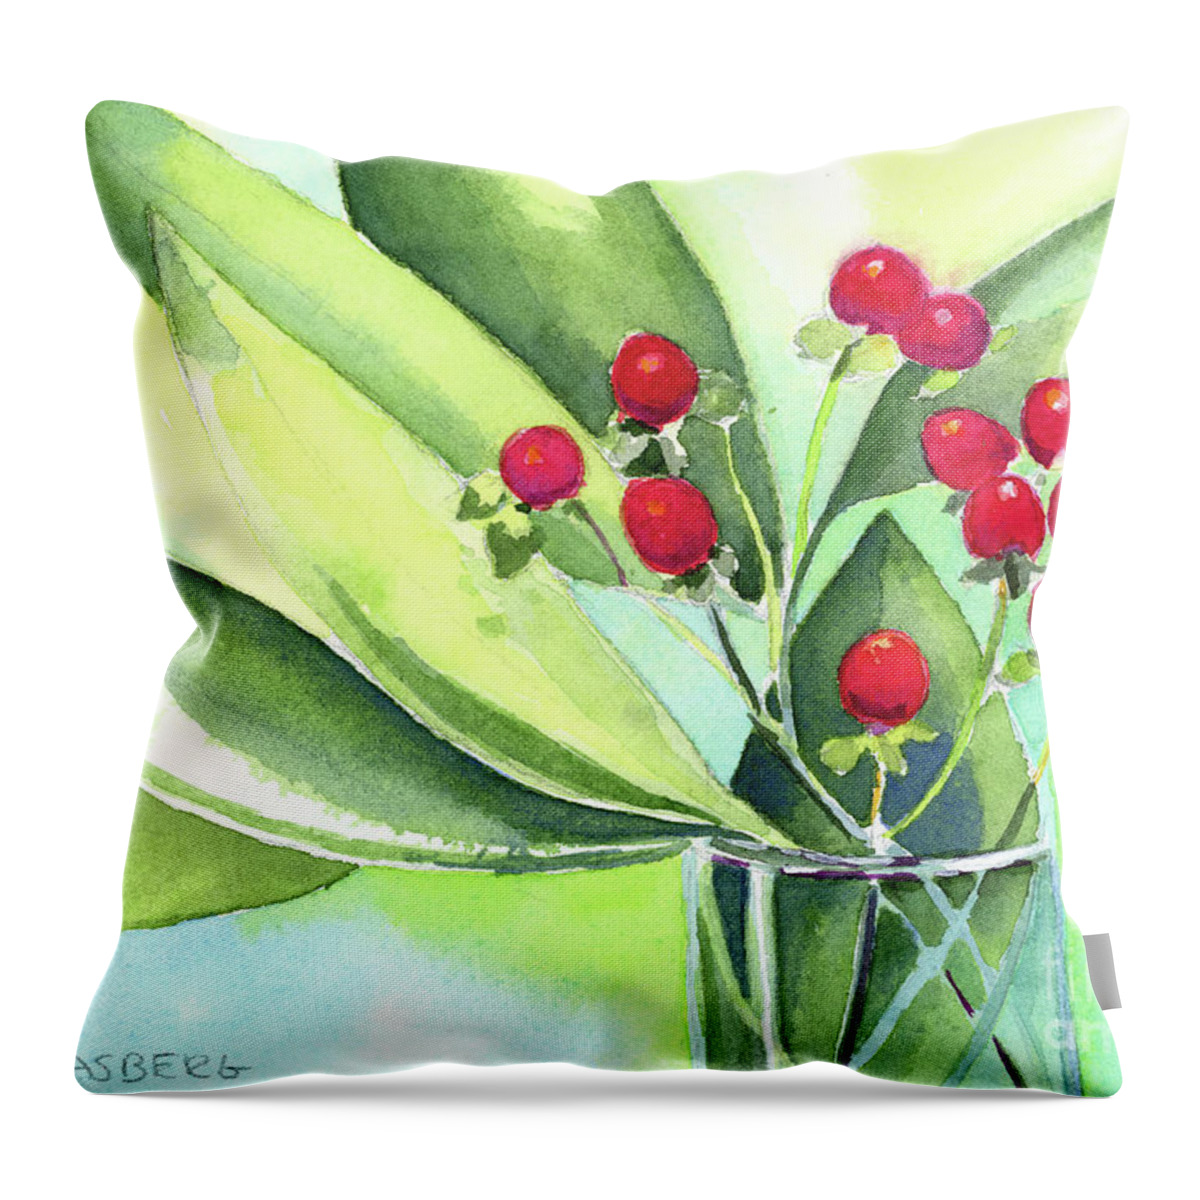 Face Mask Throw Pillow featuring the painting Berry Good by Lois Blasberg